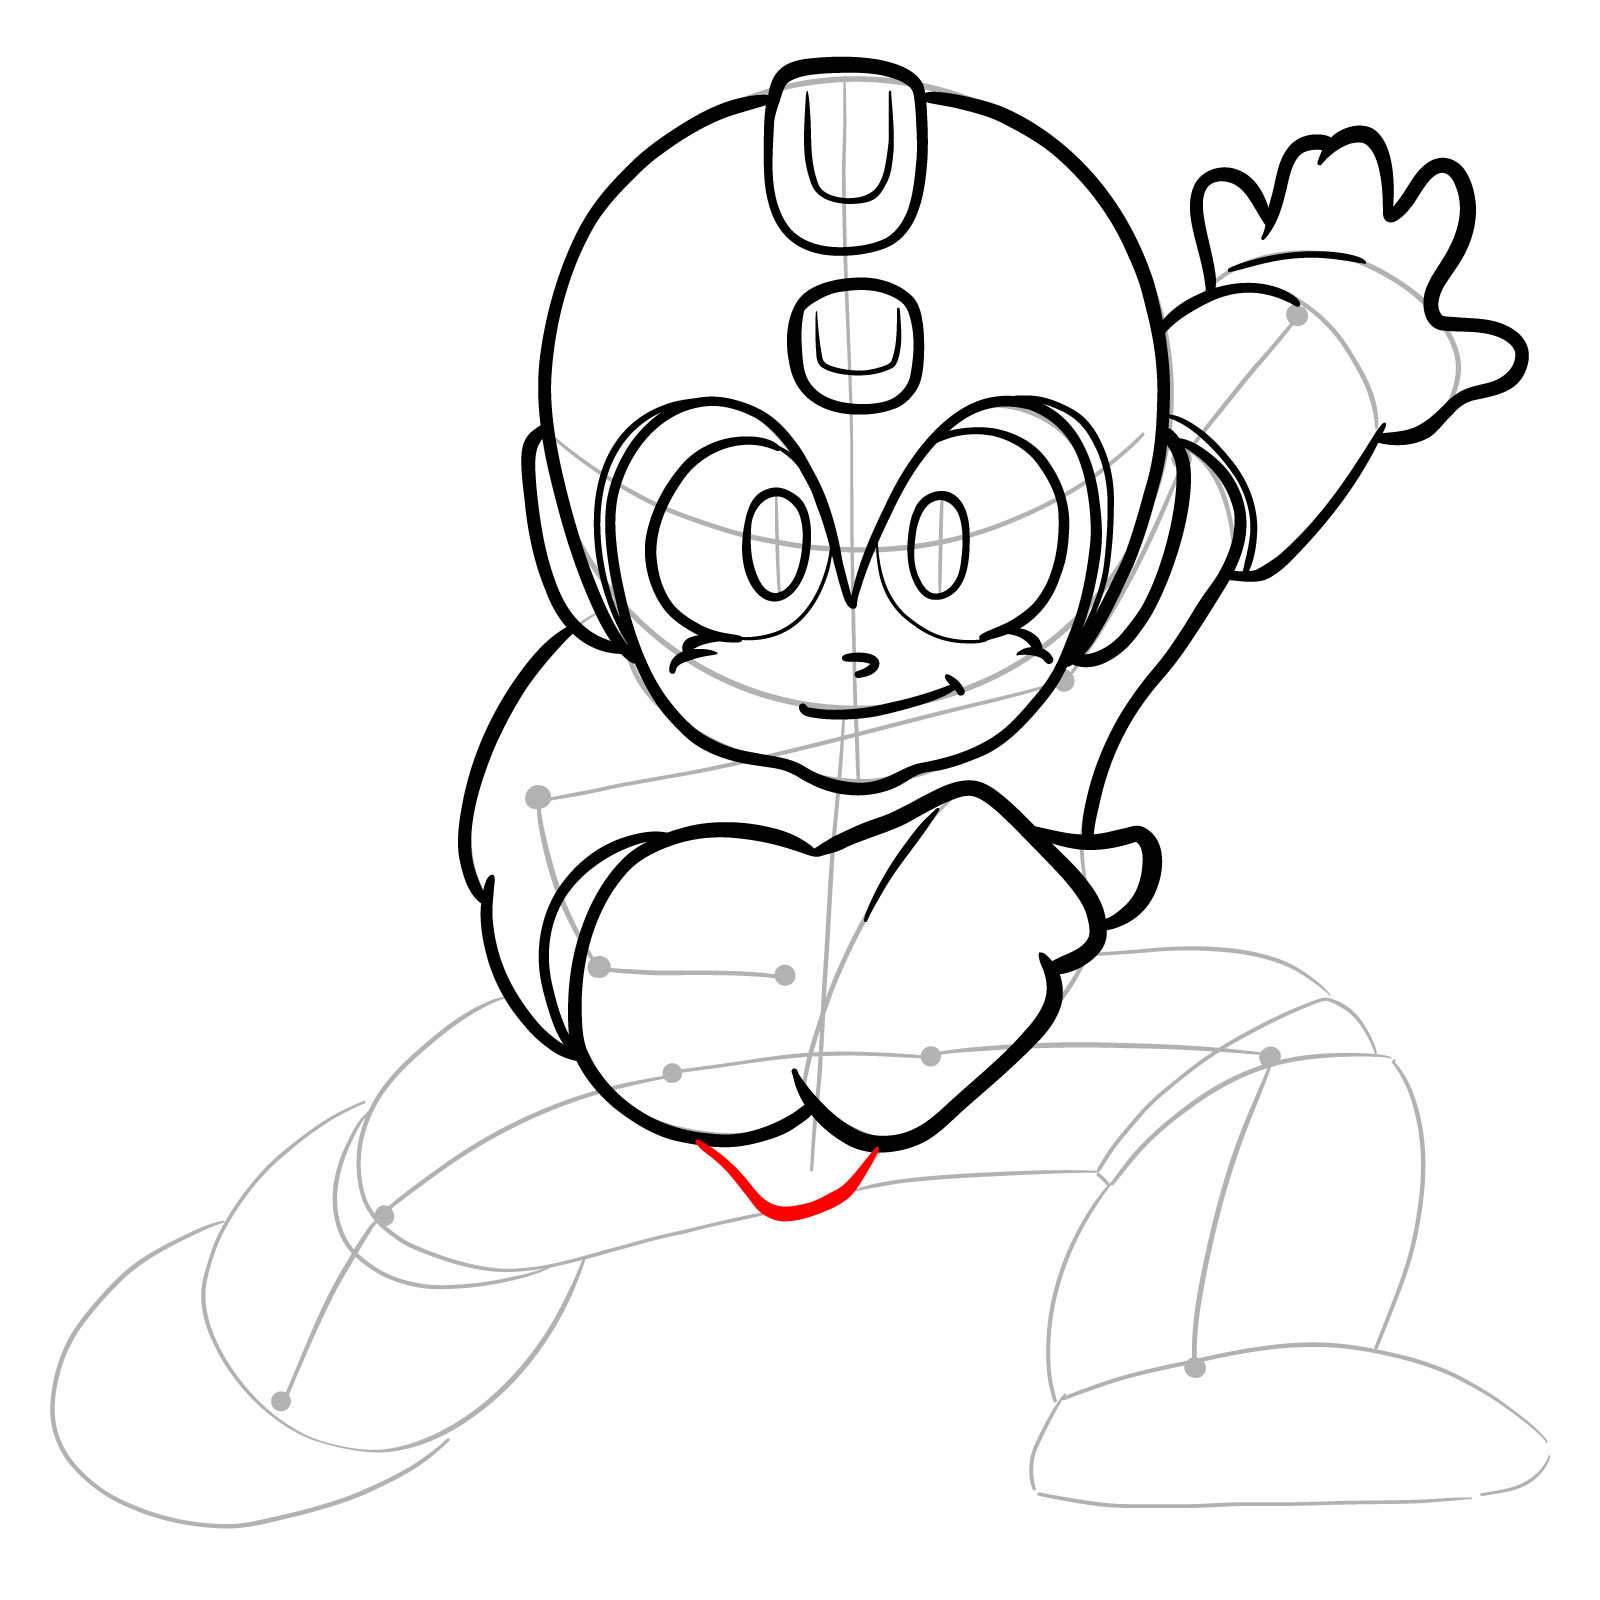 How to draw Mega Man from the original game - step 18